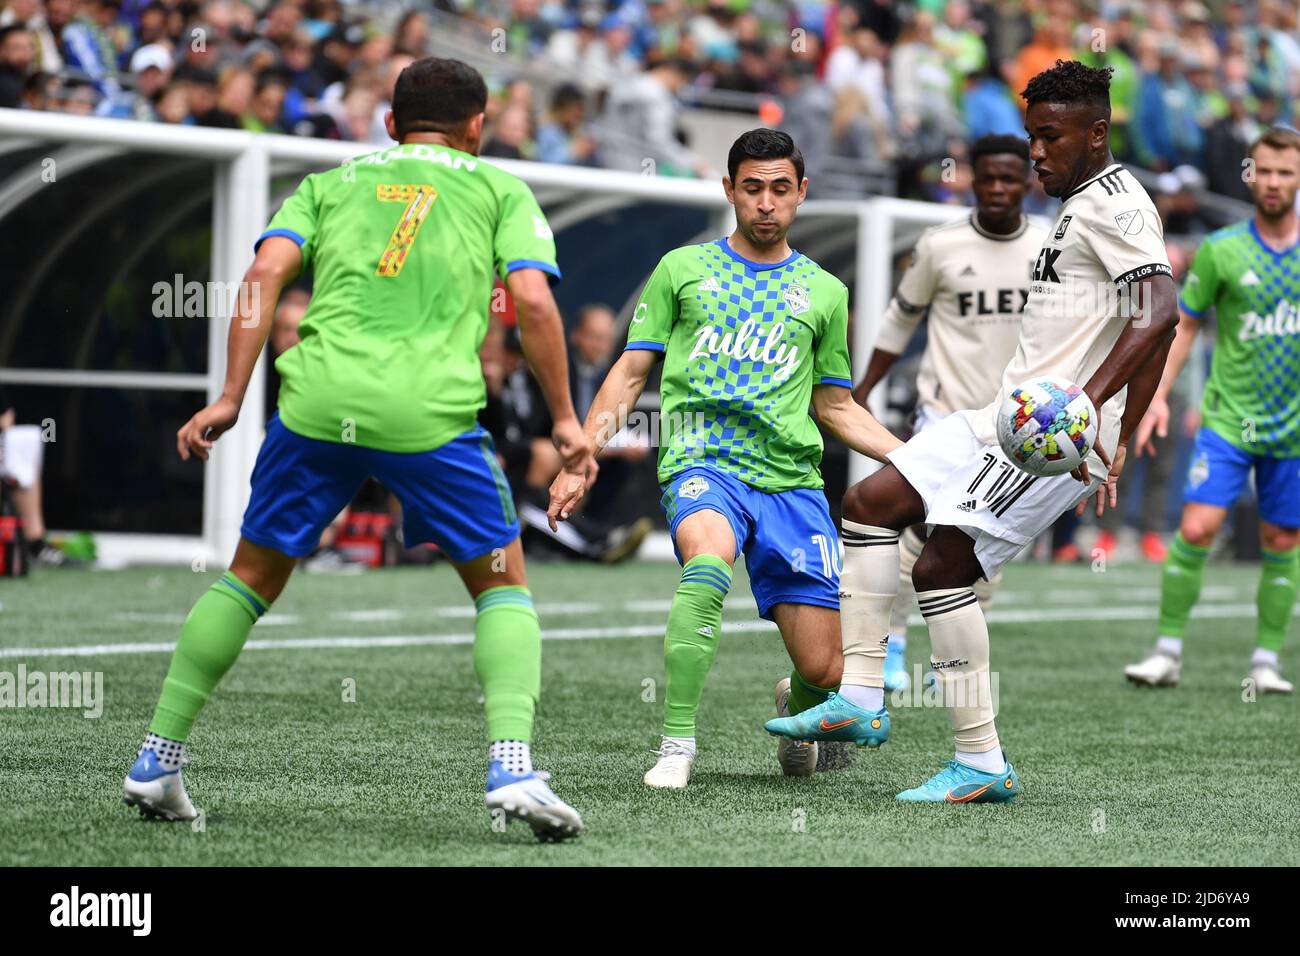 June 18, 2022: Seattle Sounders midfielder Alexander Roldan and LAFC midfielder José Cifuentes during the MLS soccer match between LAFC and Seattle Sounders FC at Lumen Field in Seattle, WA. The teams battle to a 1-1 draw. Steve Faber/CSM Stock Photo